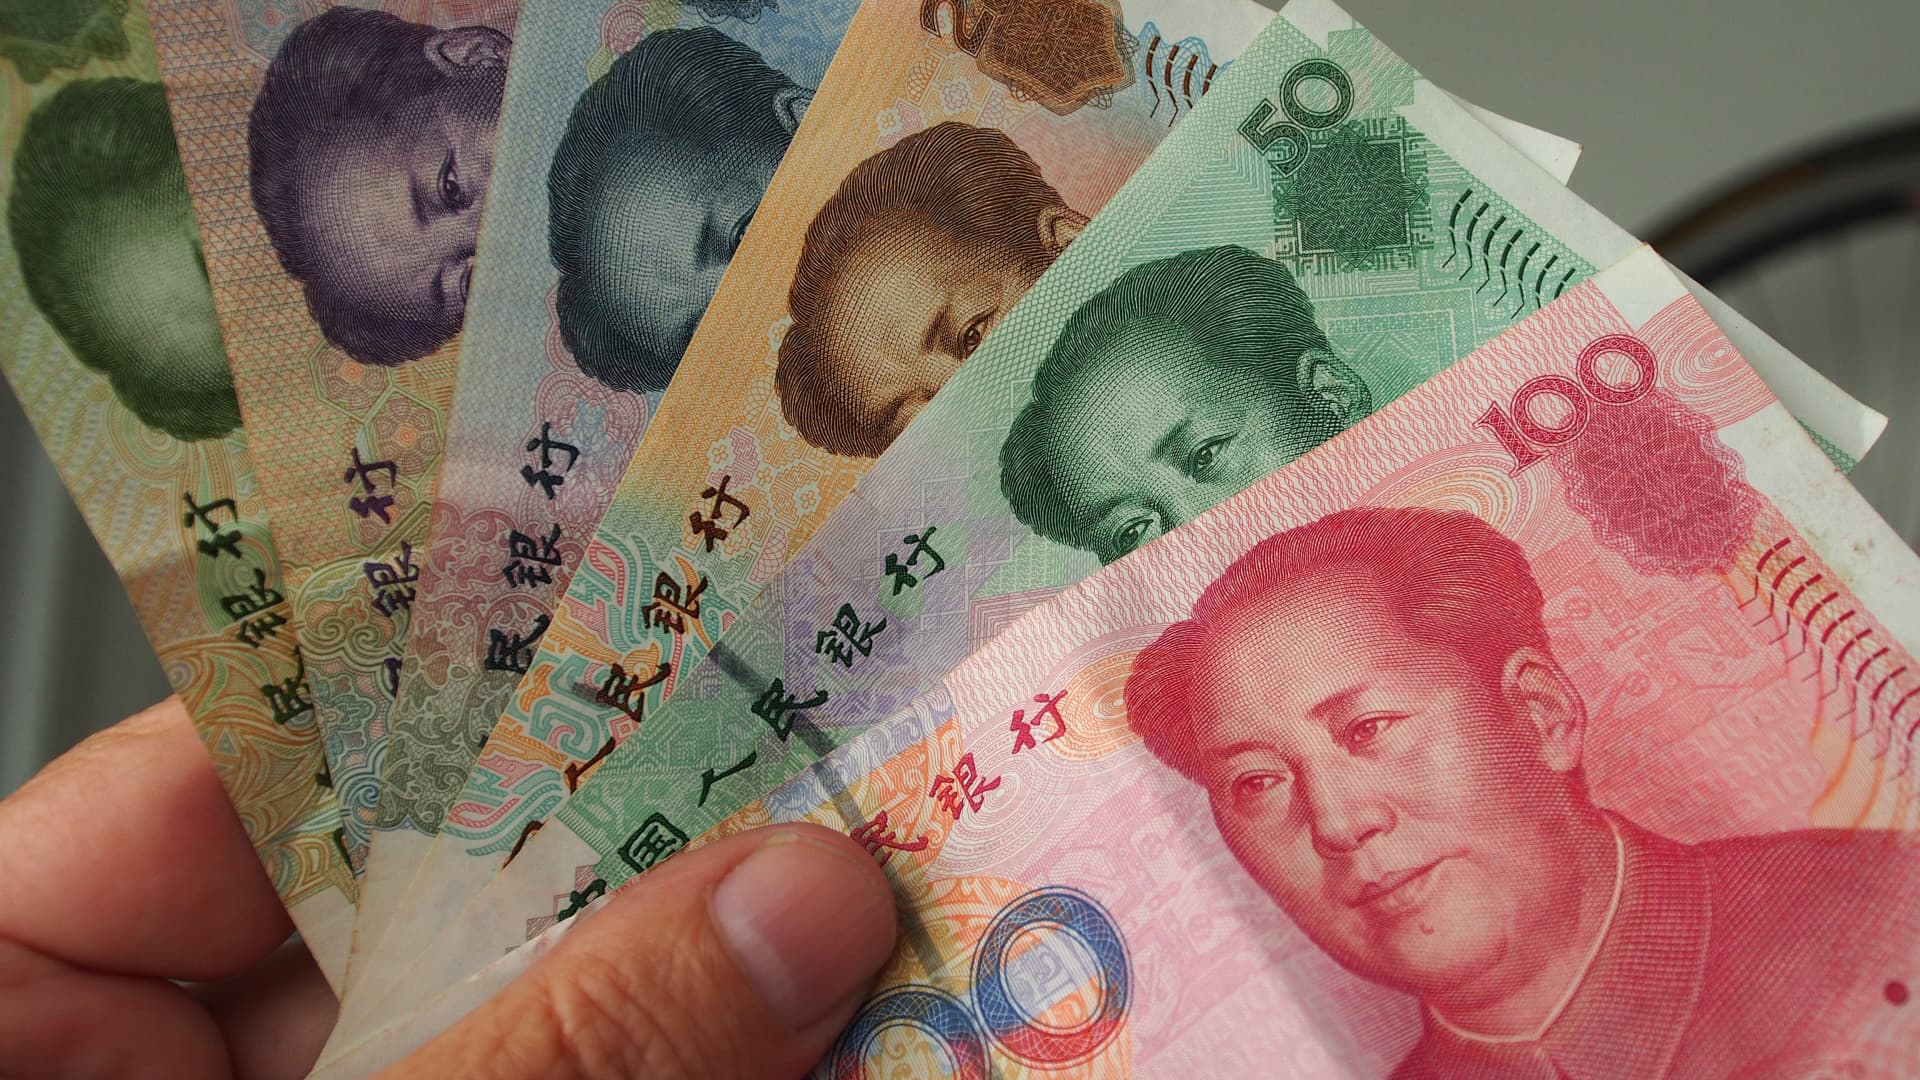 China’s central bank steps in to slow its rapidly weakening currency, as yuan hits one-year lows